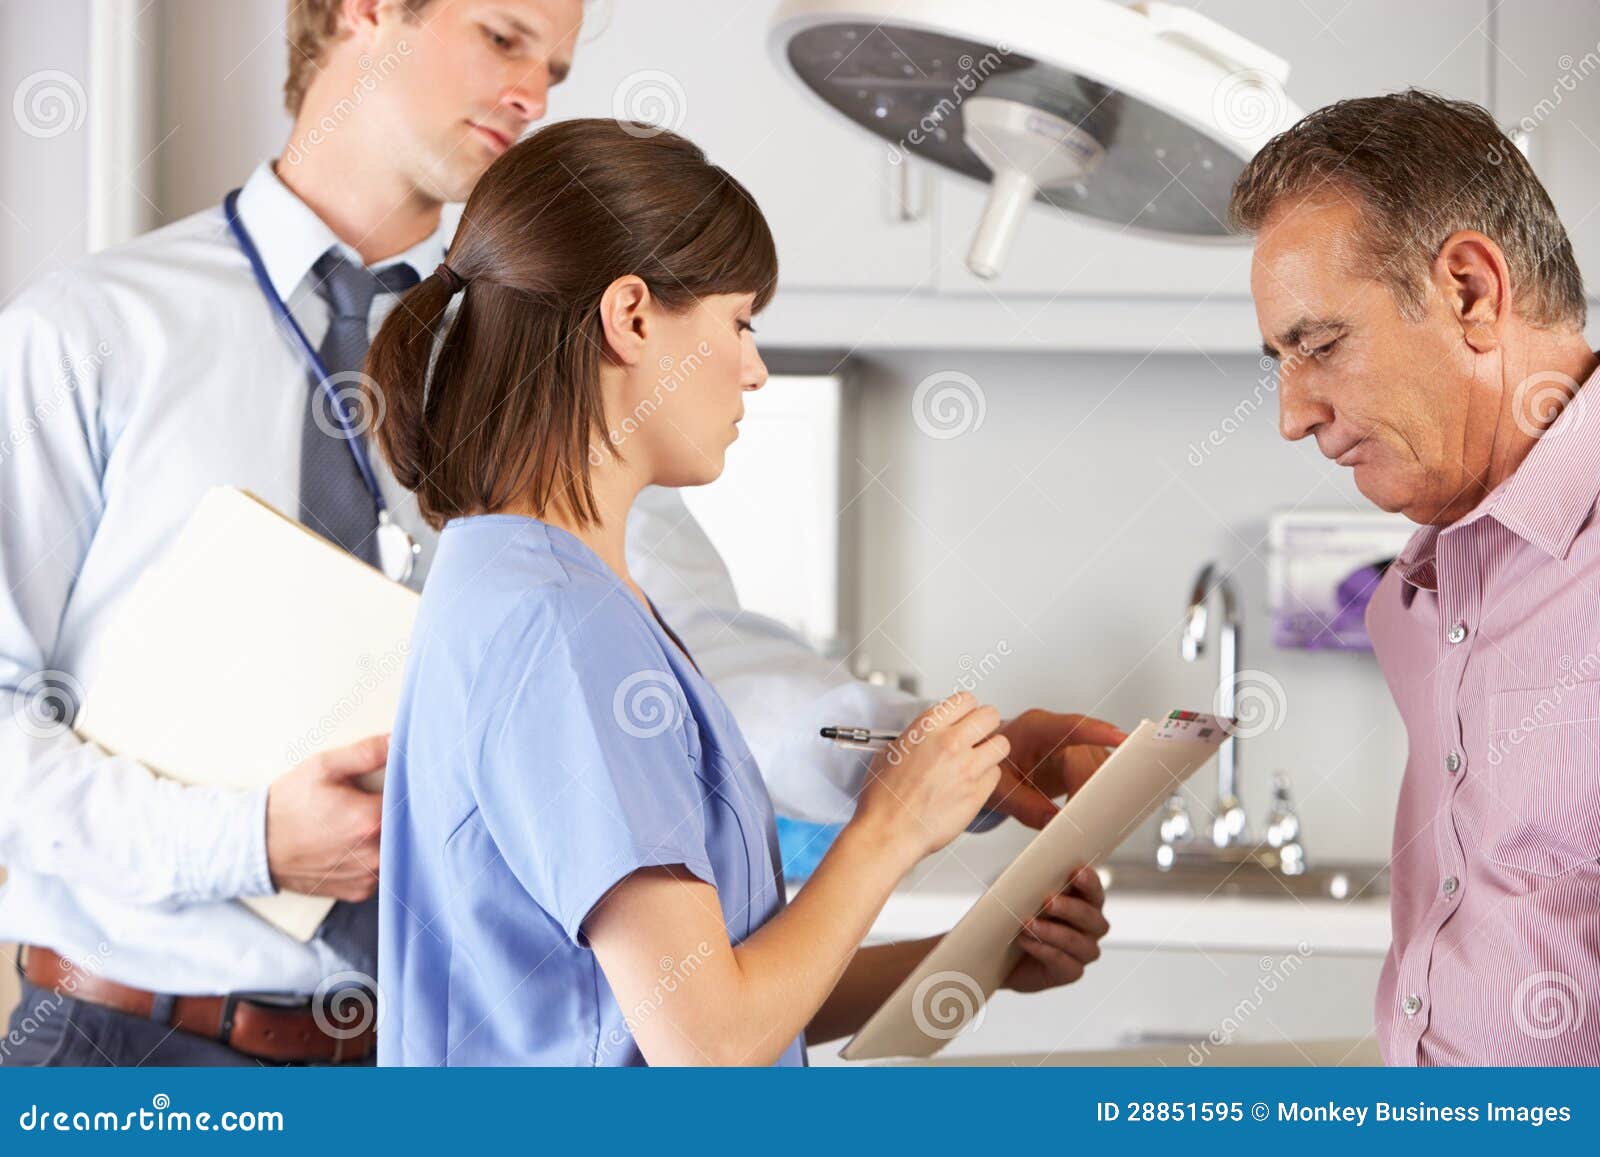 male patient being examined by doctor and intern